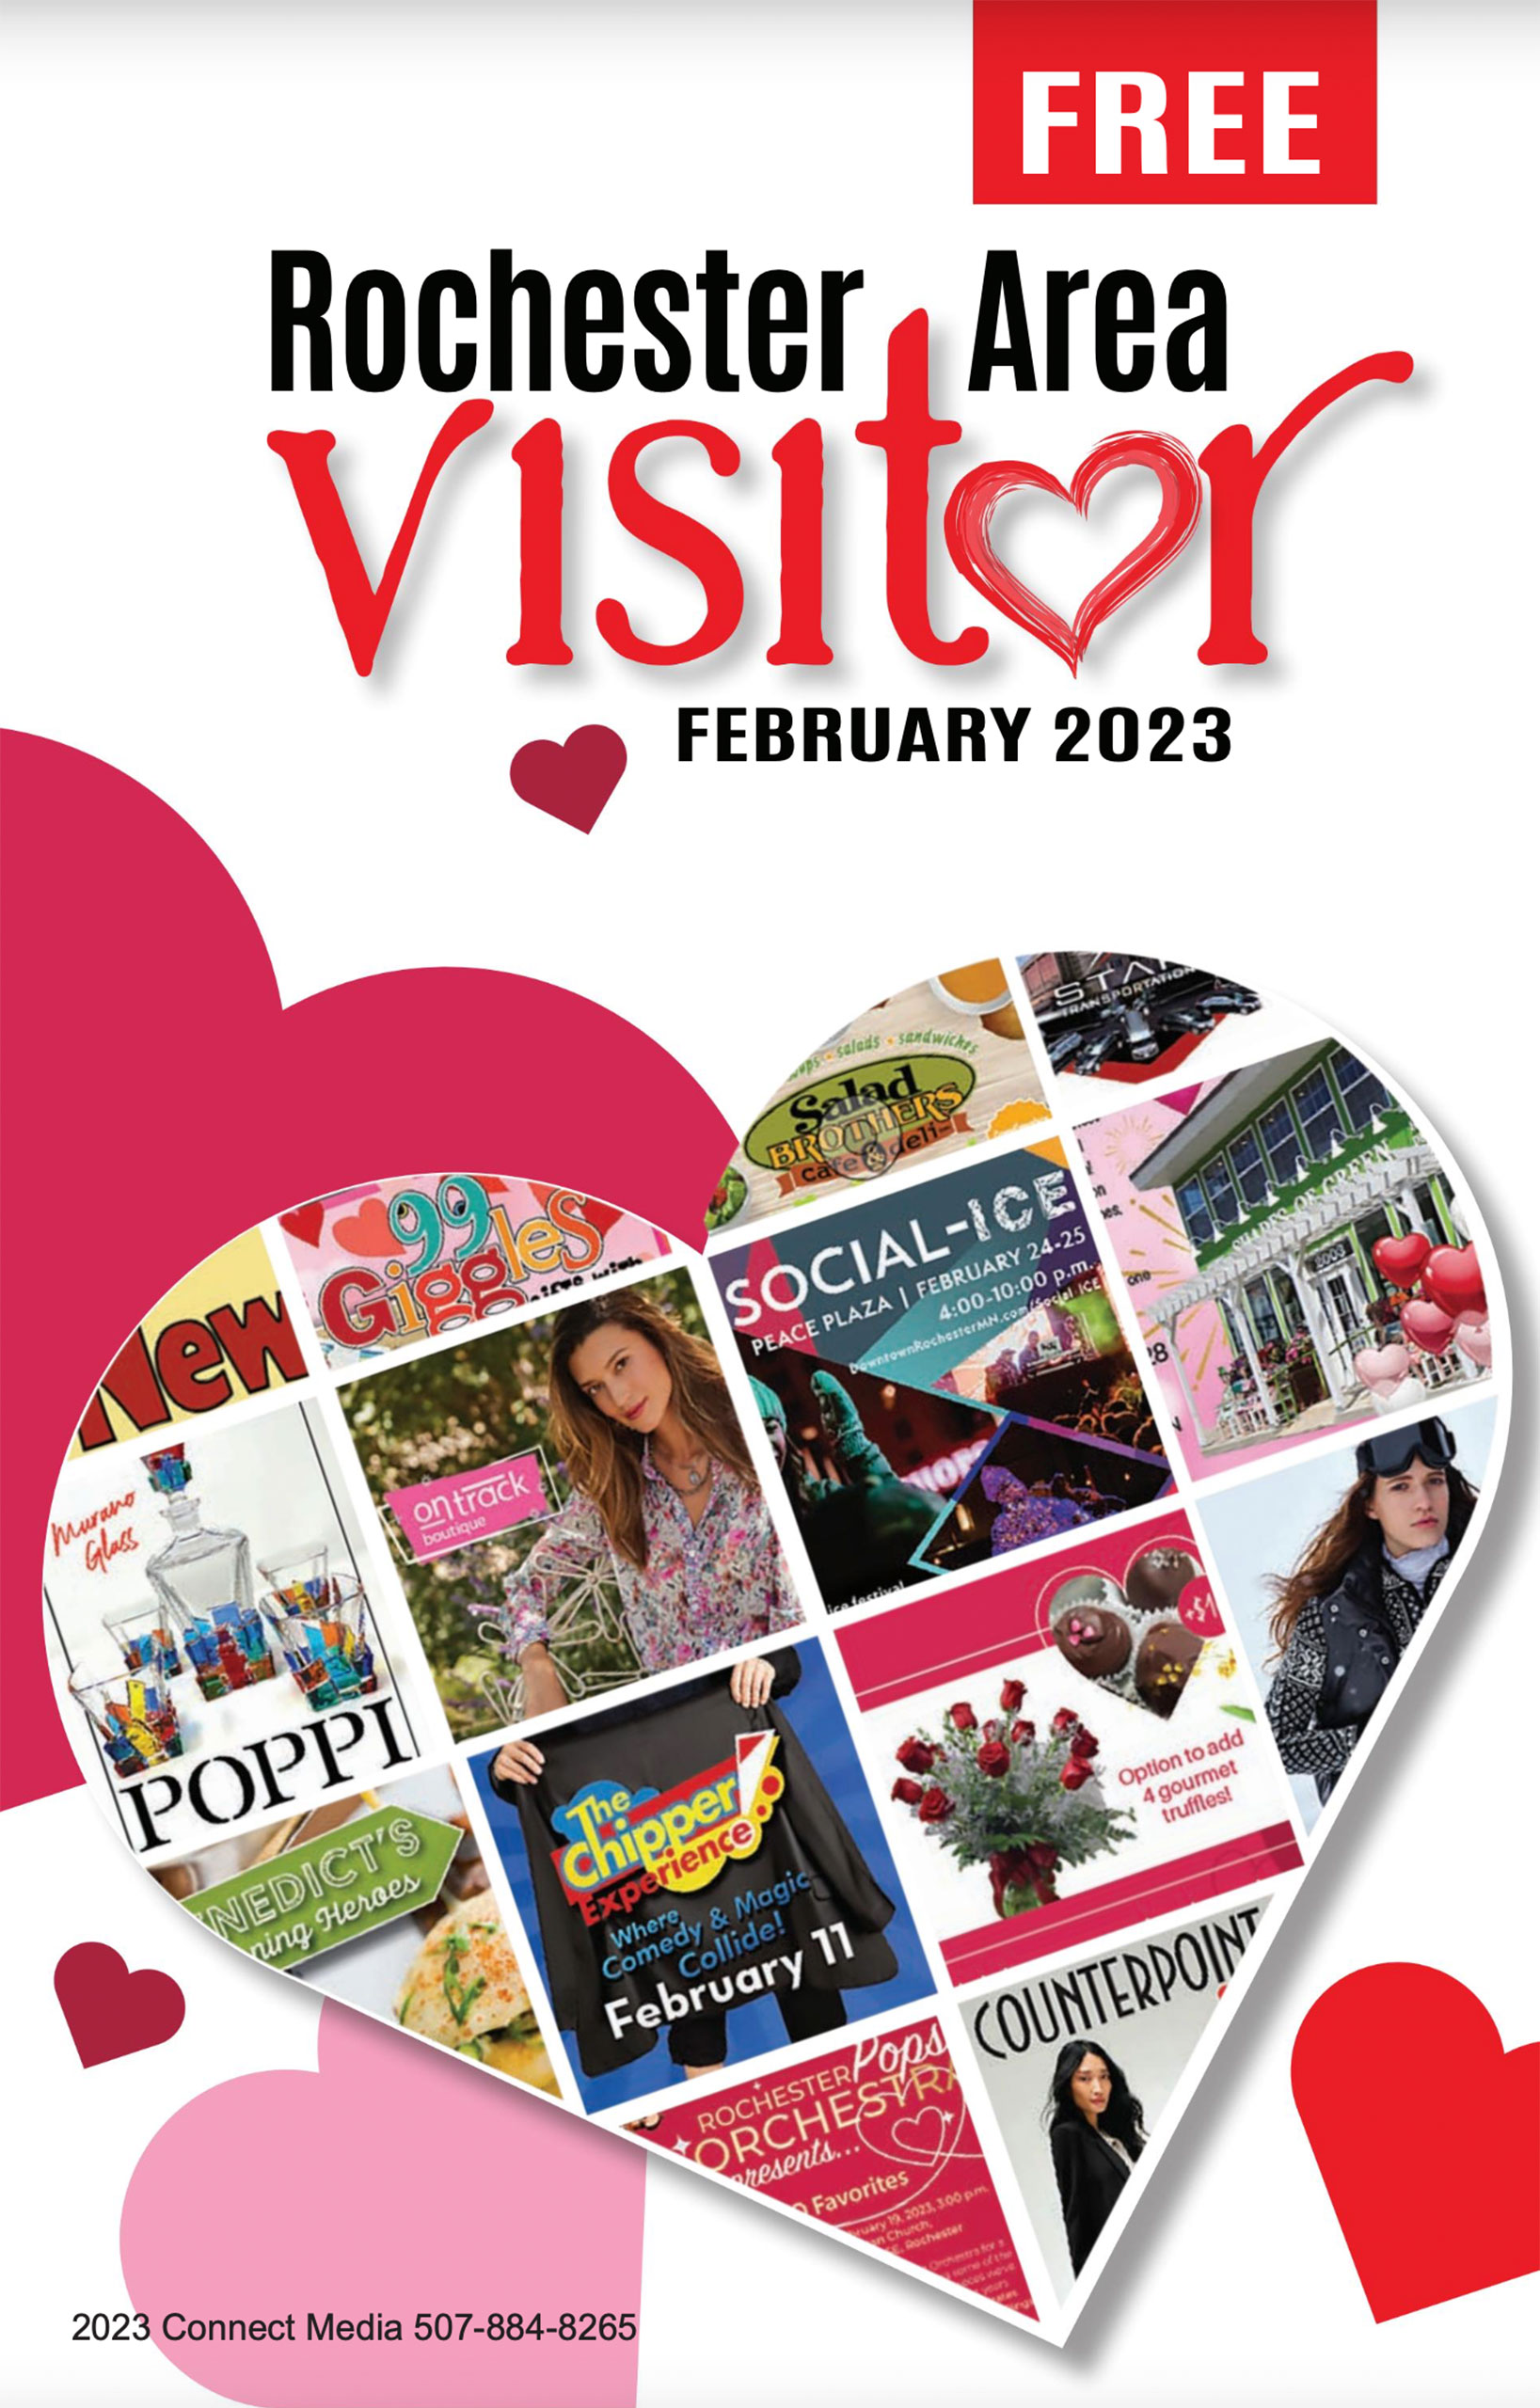 //rochestervisitor.com/wp-content/uploads/2023/01/cover.jpg